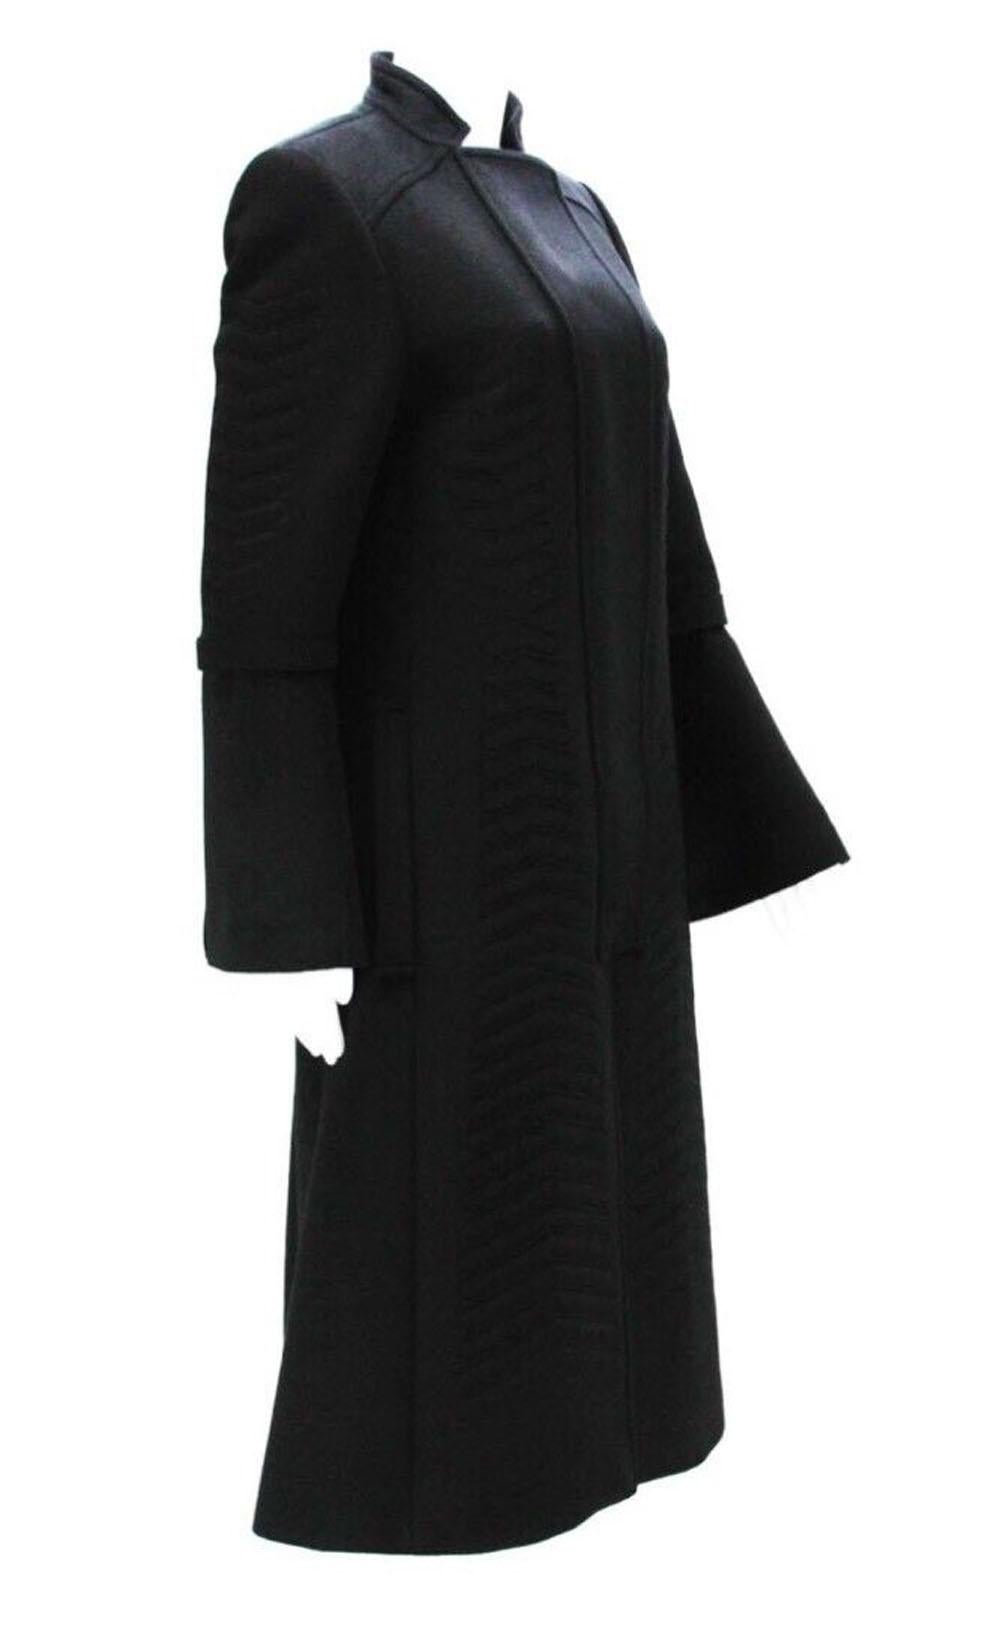 Tom Ford for Gucci F/W 2004 Black Angora Wool Chevron Pattern Coat with Belt  42 For Sale 3